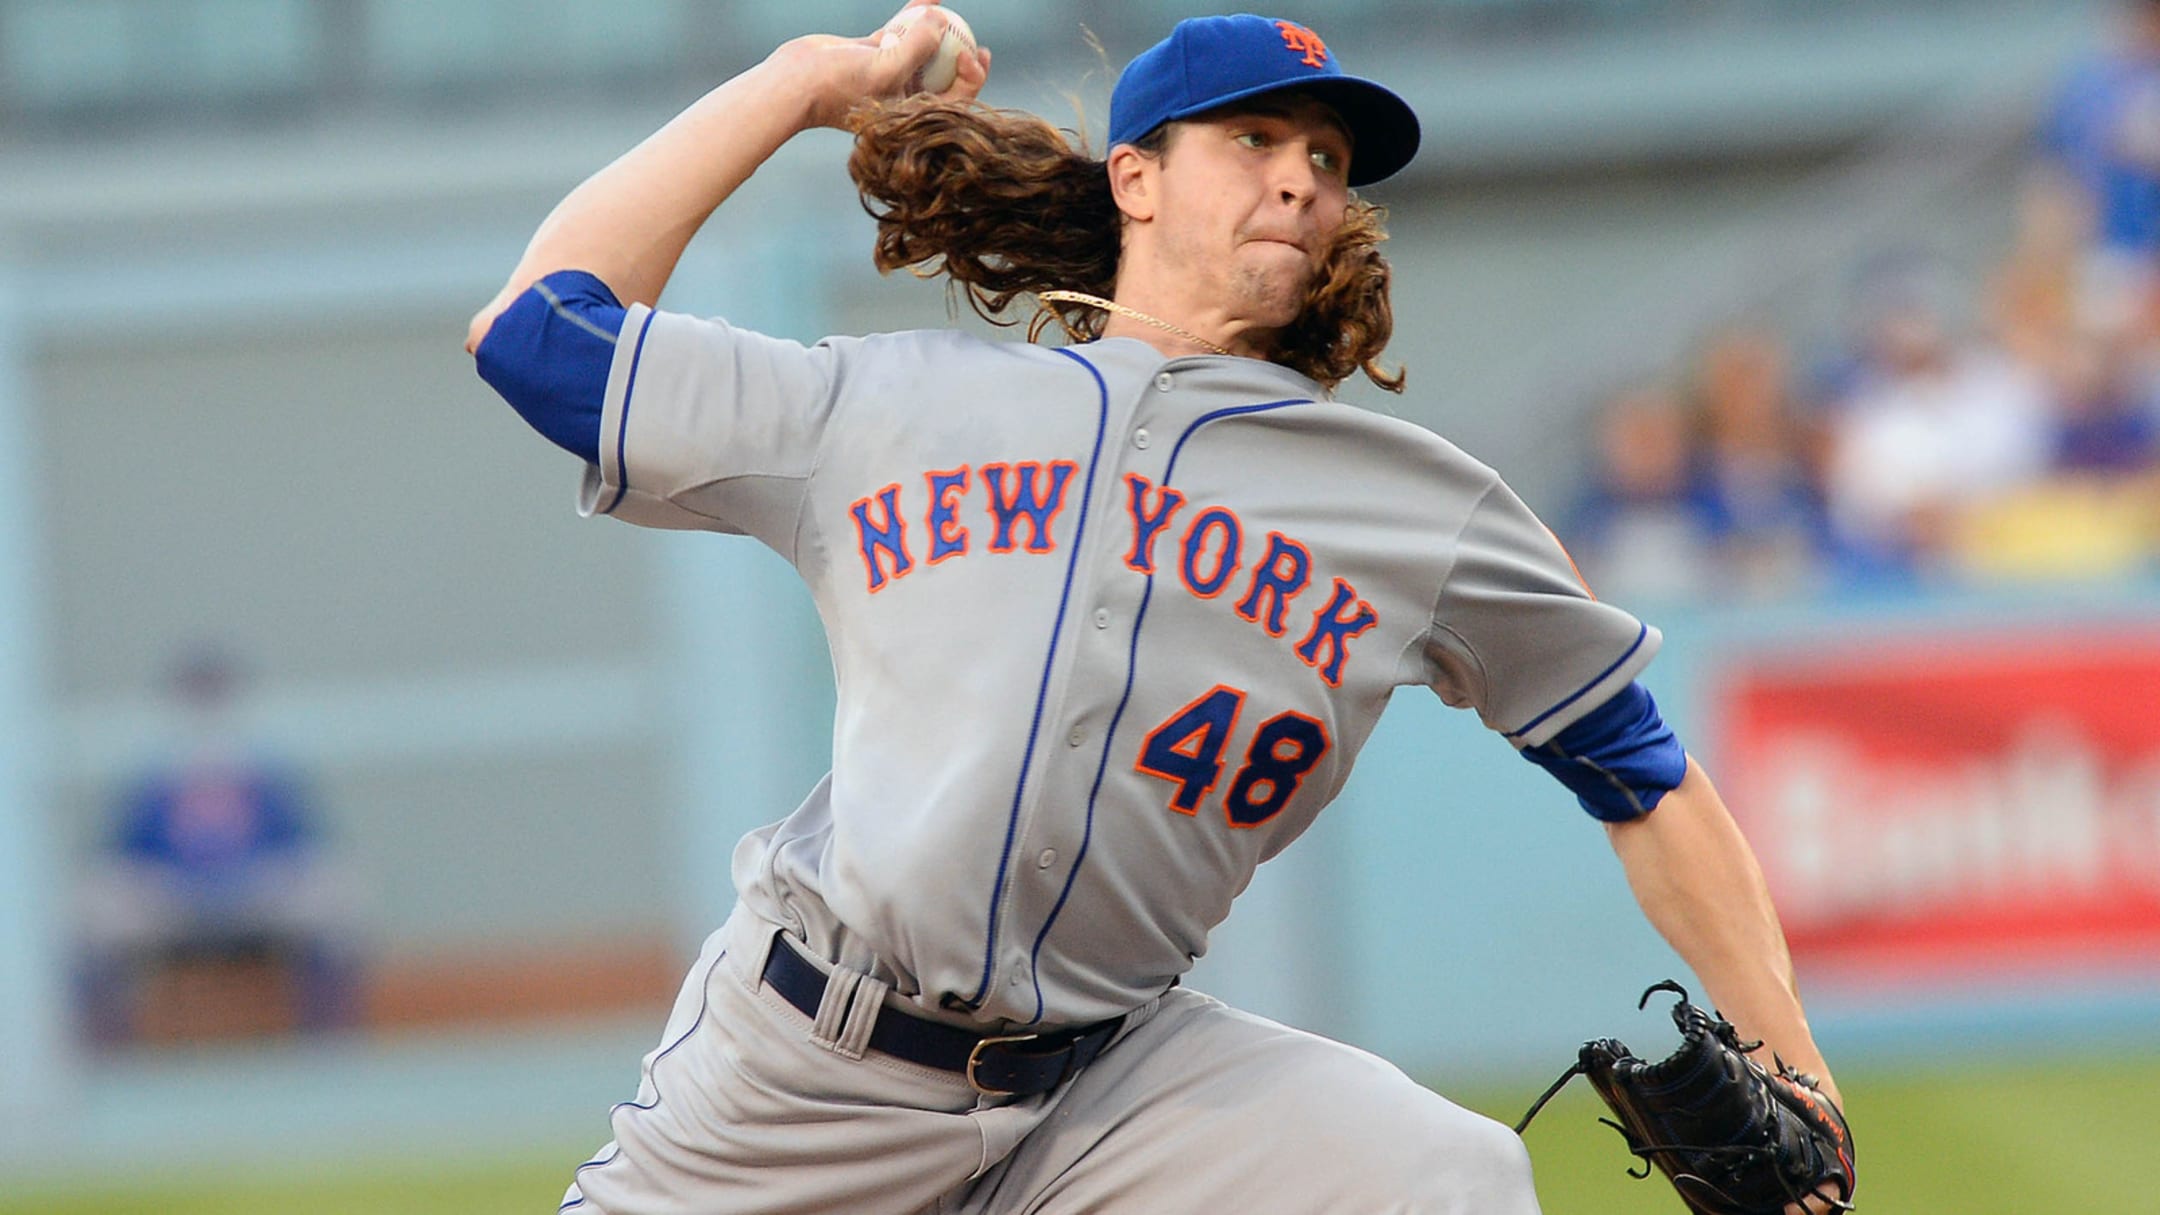 Jacob deGrom won't have his hair chopped off after all - NBC Sports